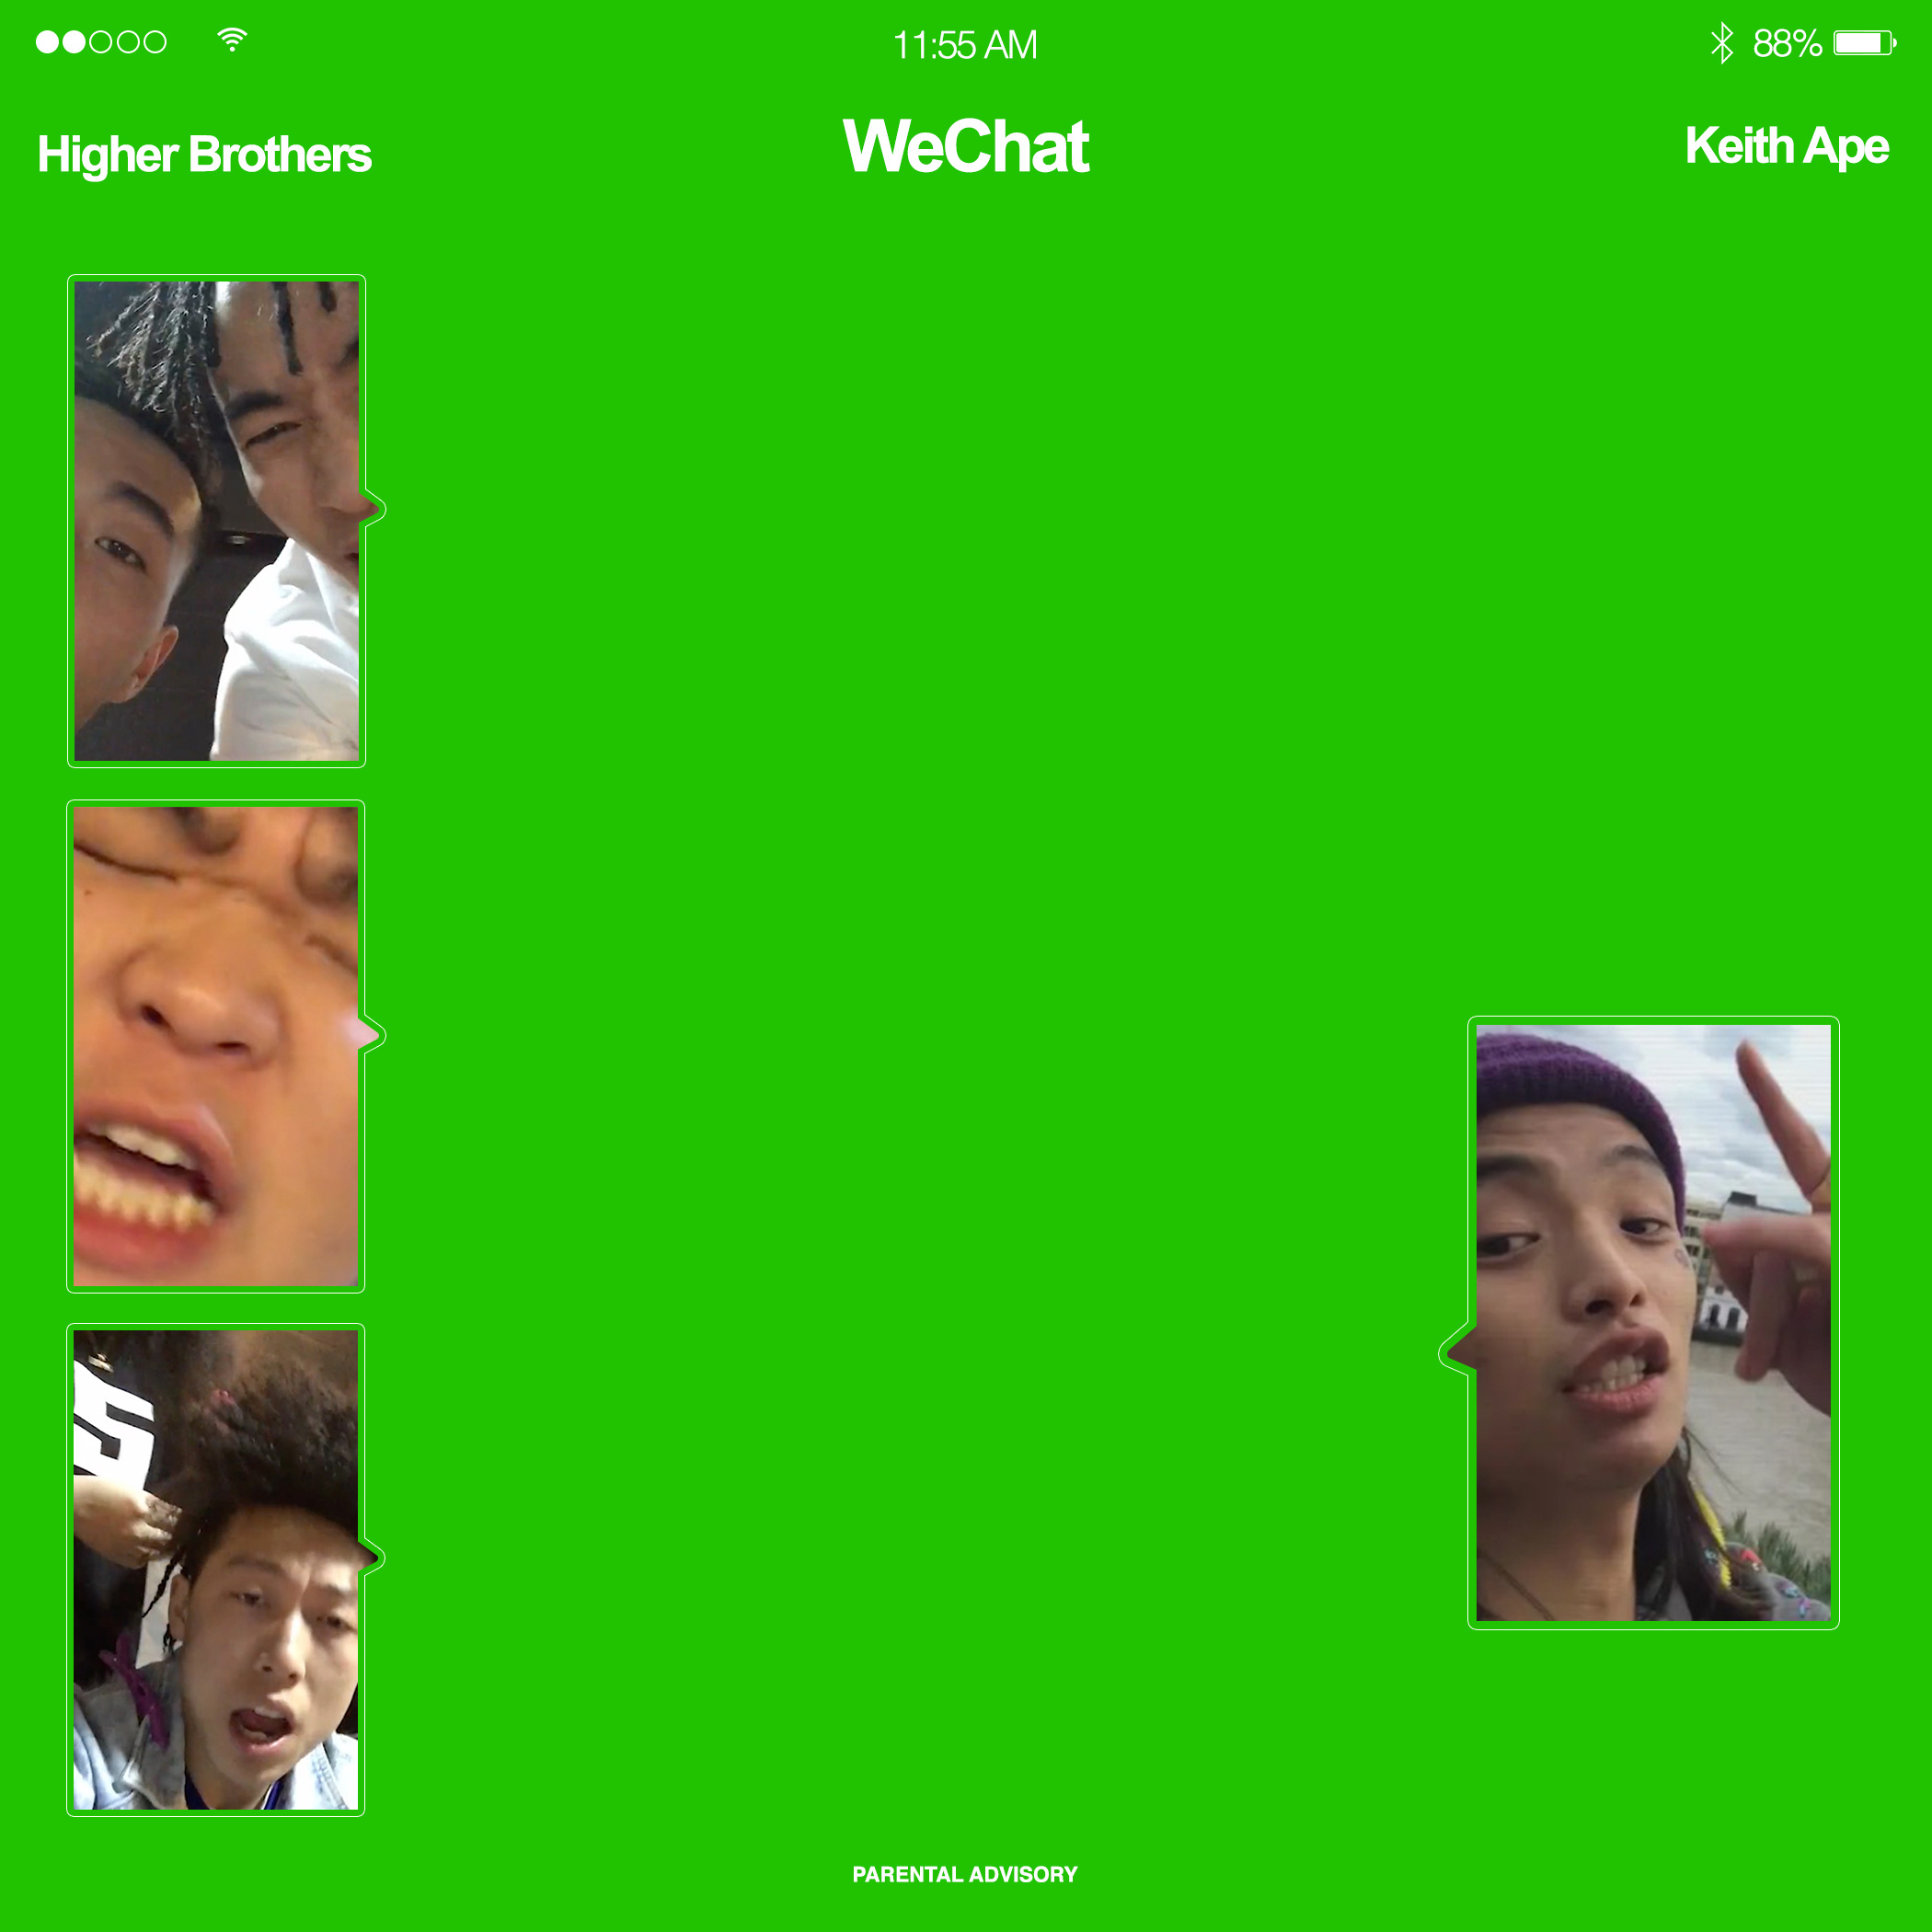 Wechat(Higher Brothers演唱歌曲)